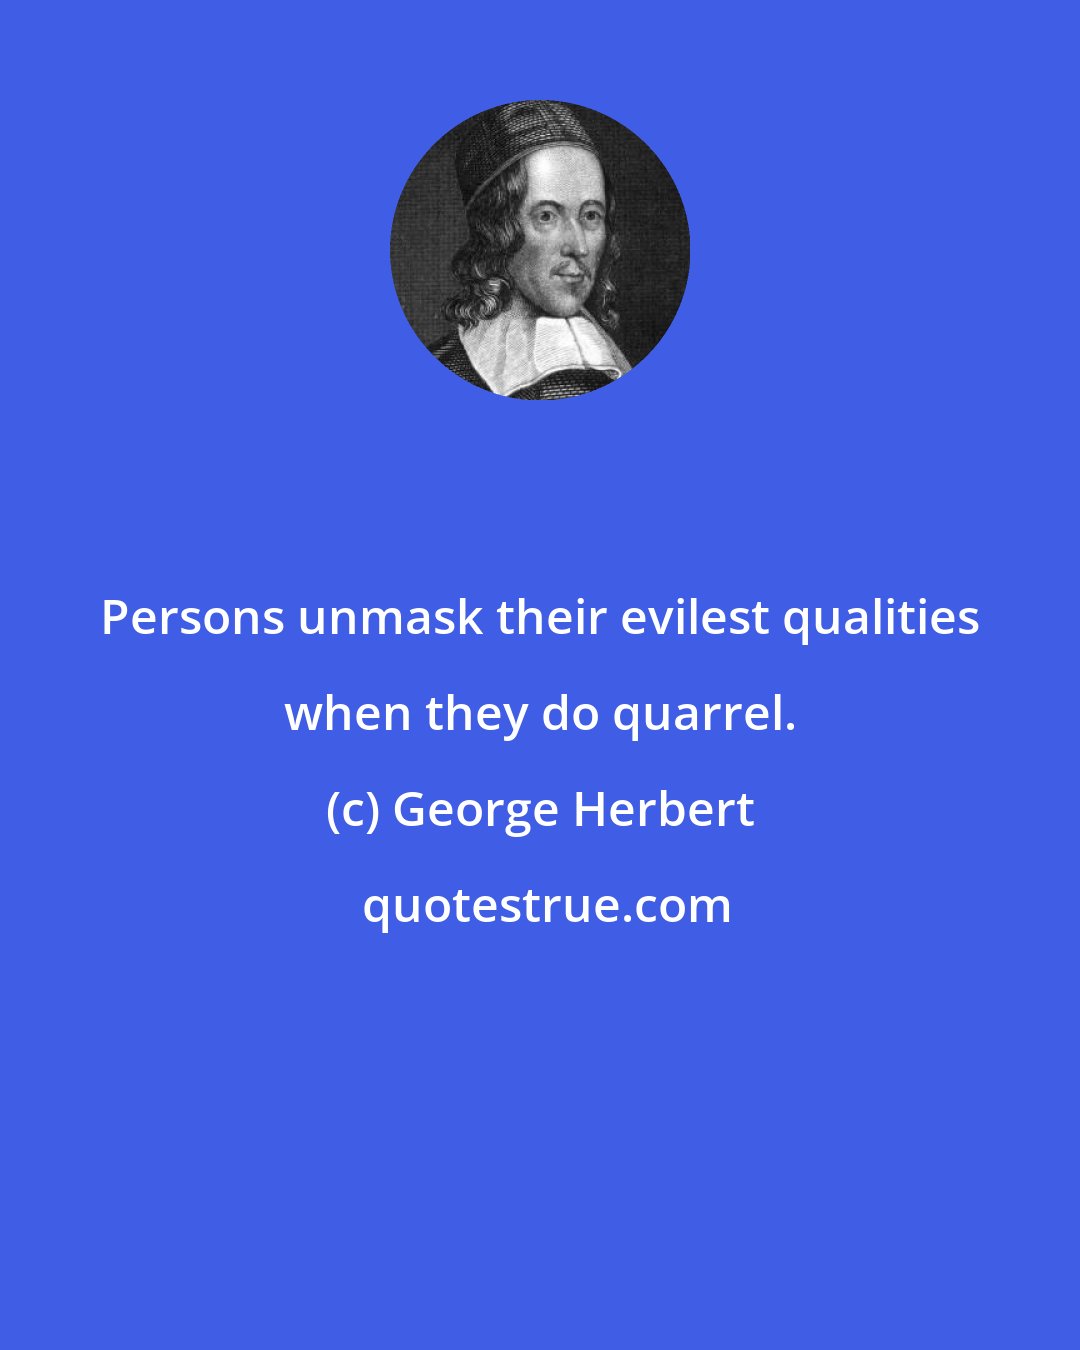 George Herbert: Persons unmask their evilest qualities when they do quarrel.